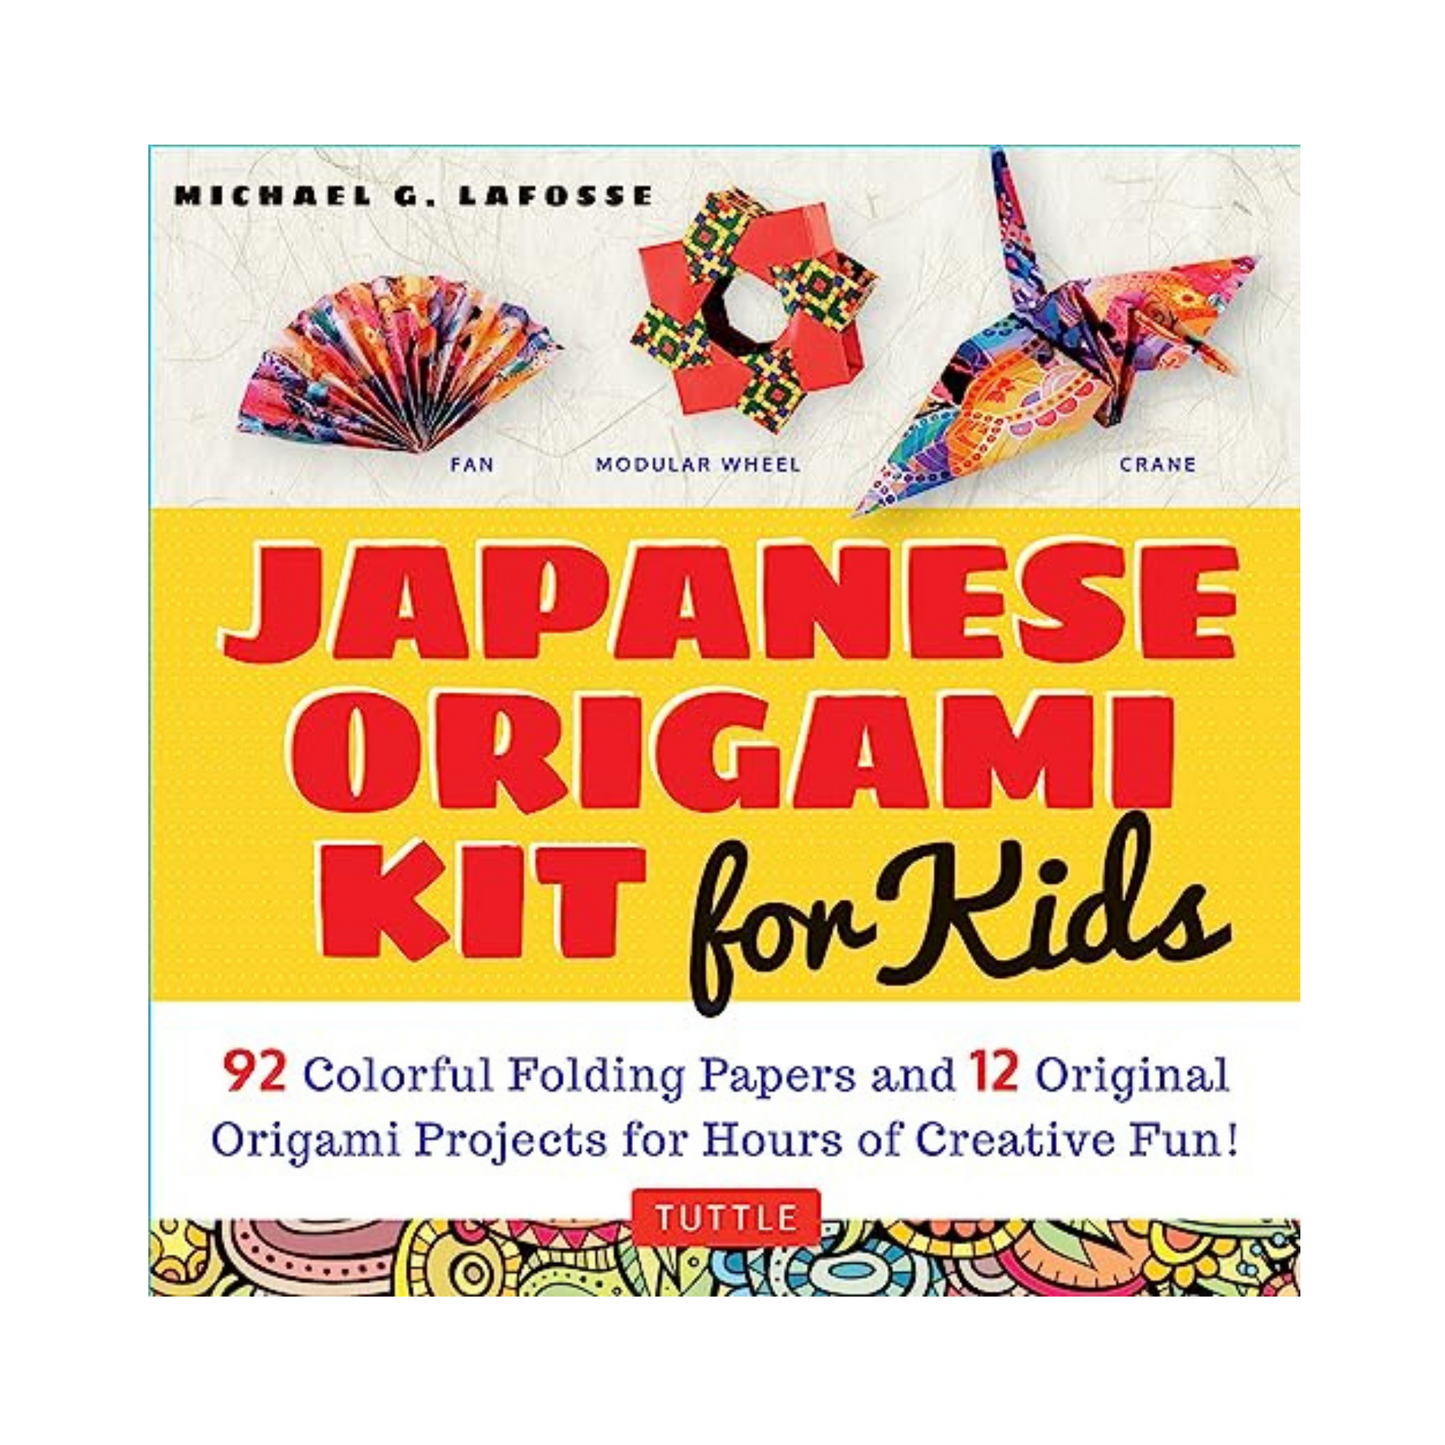 Japanese Origami Kit for Kids 92 Colorful Folding Papers [Origami Book with 12 projects]